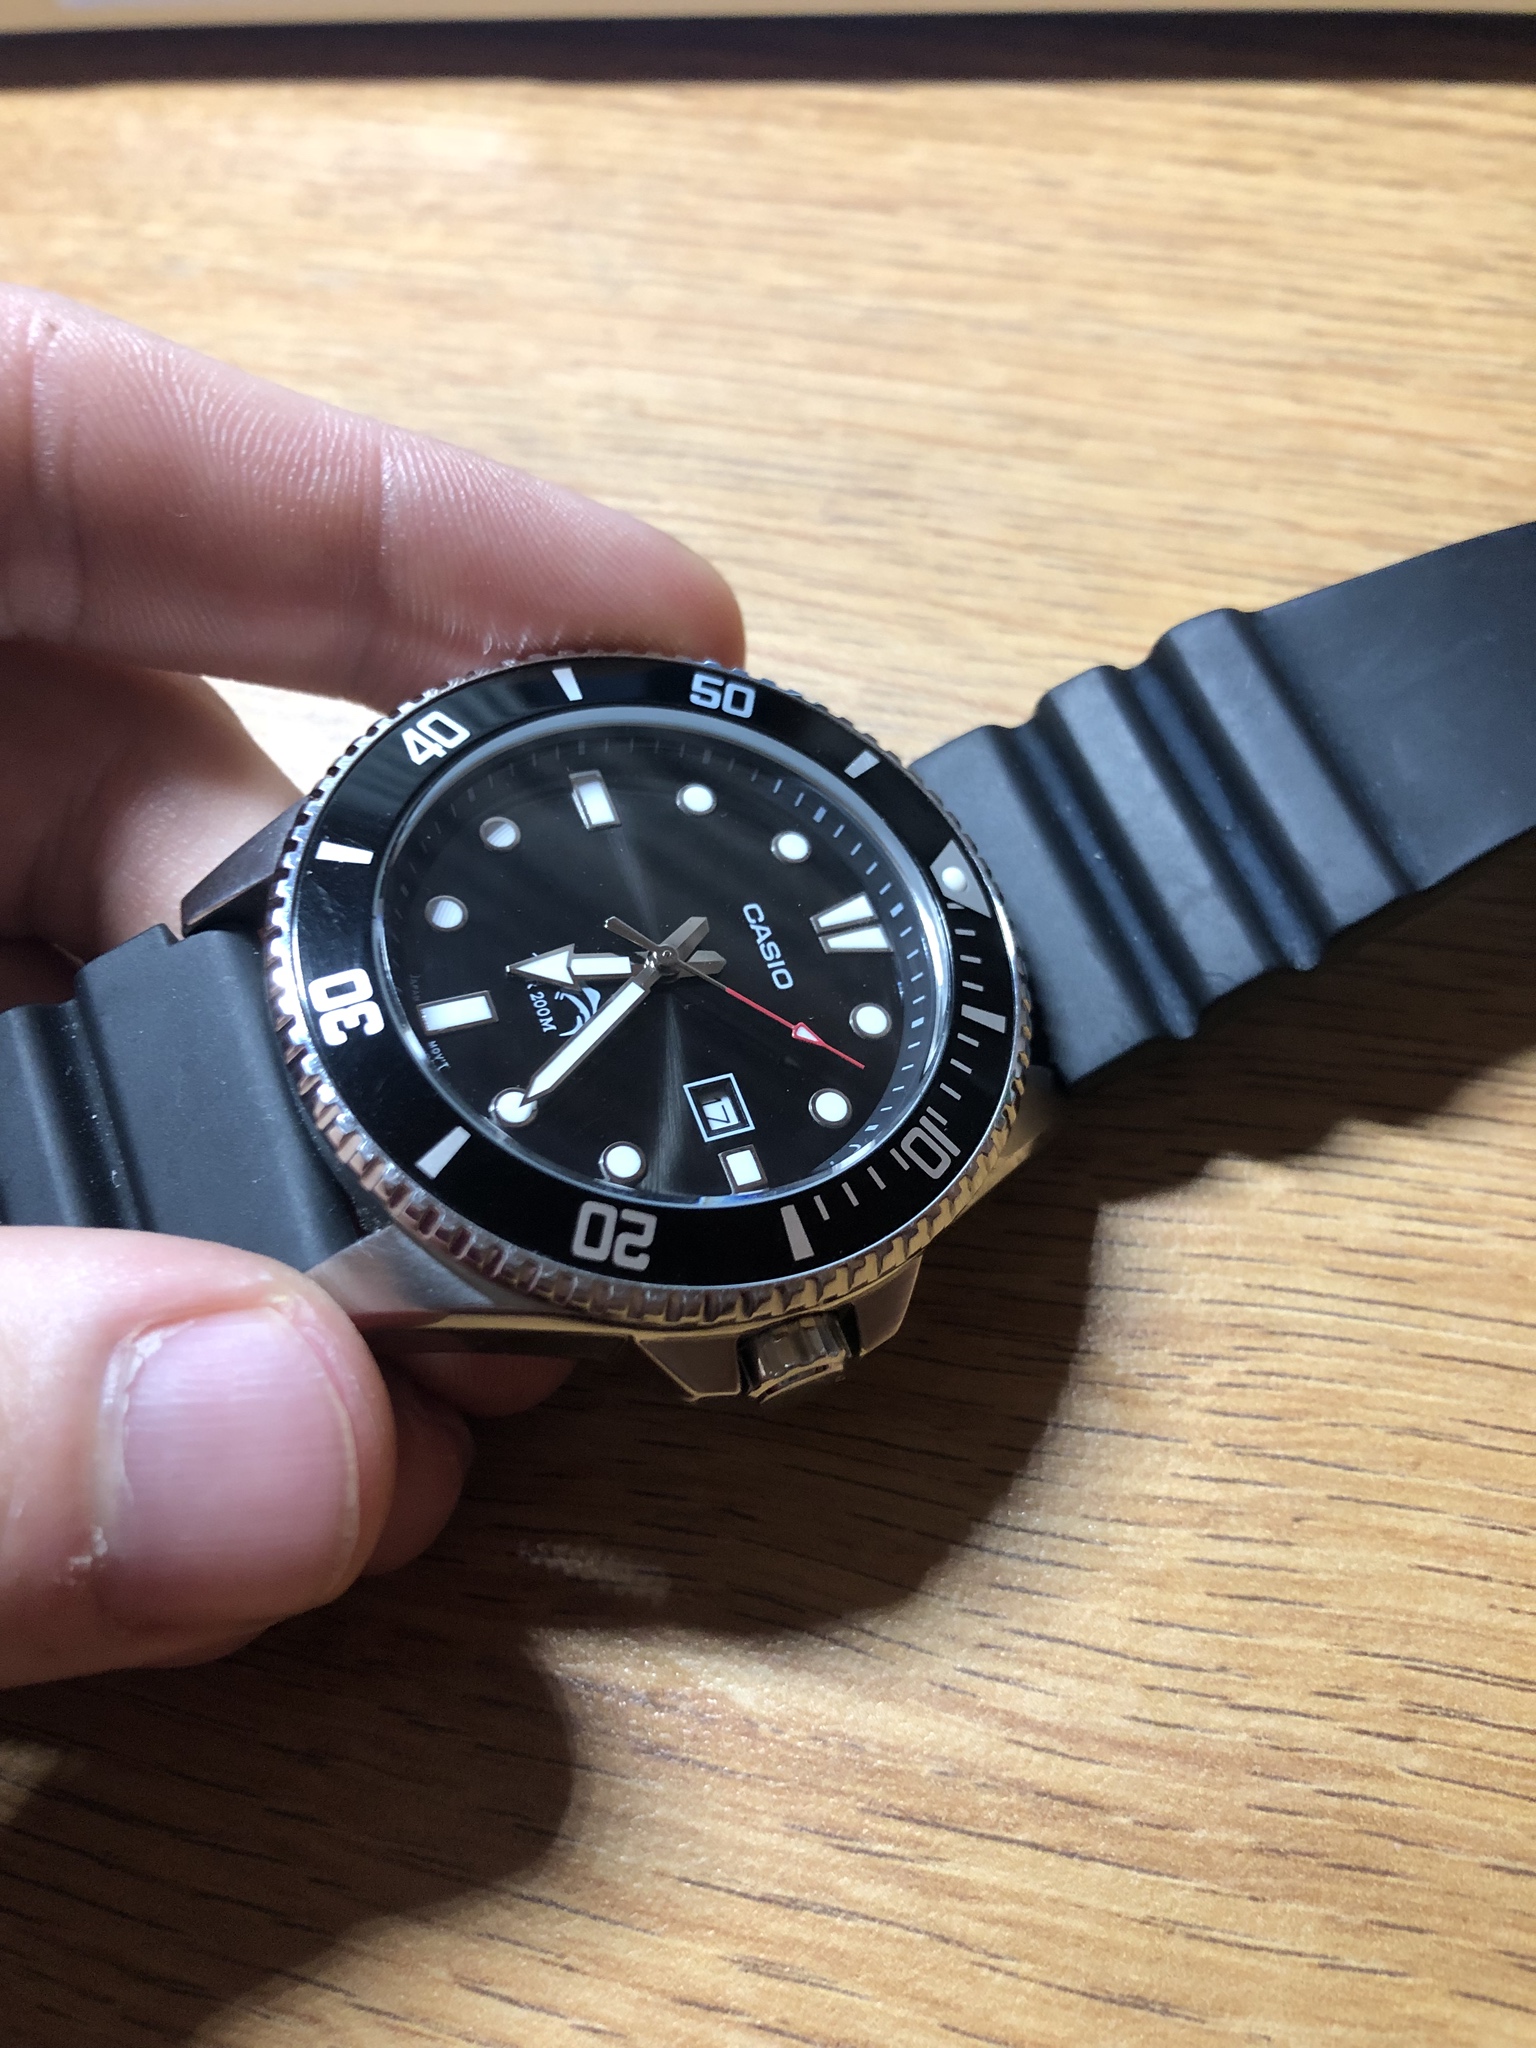 WTS]/WTT(Casio Duro Mdv-106). Looking to trade my Duro and four blushark  nato straps for a Seiko SNK series or other interesting automatic watches.  Would consider selling for $60. | WatchCharts